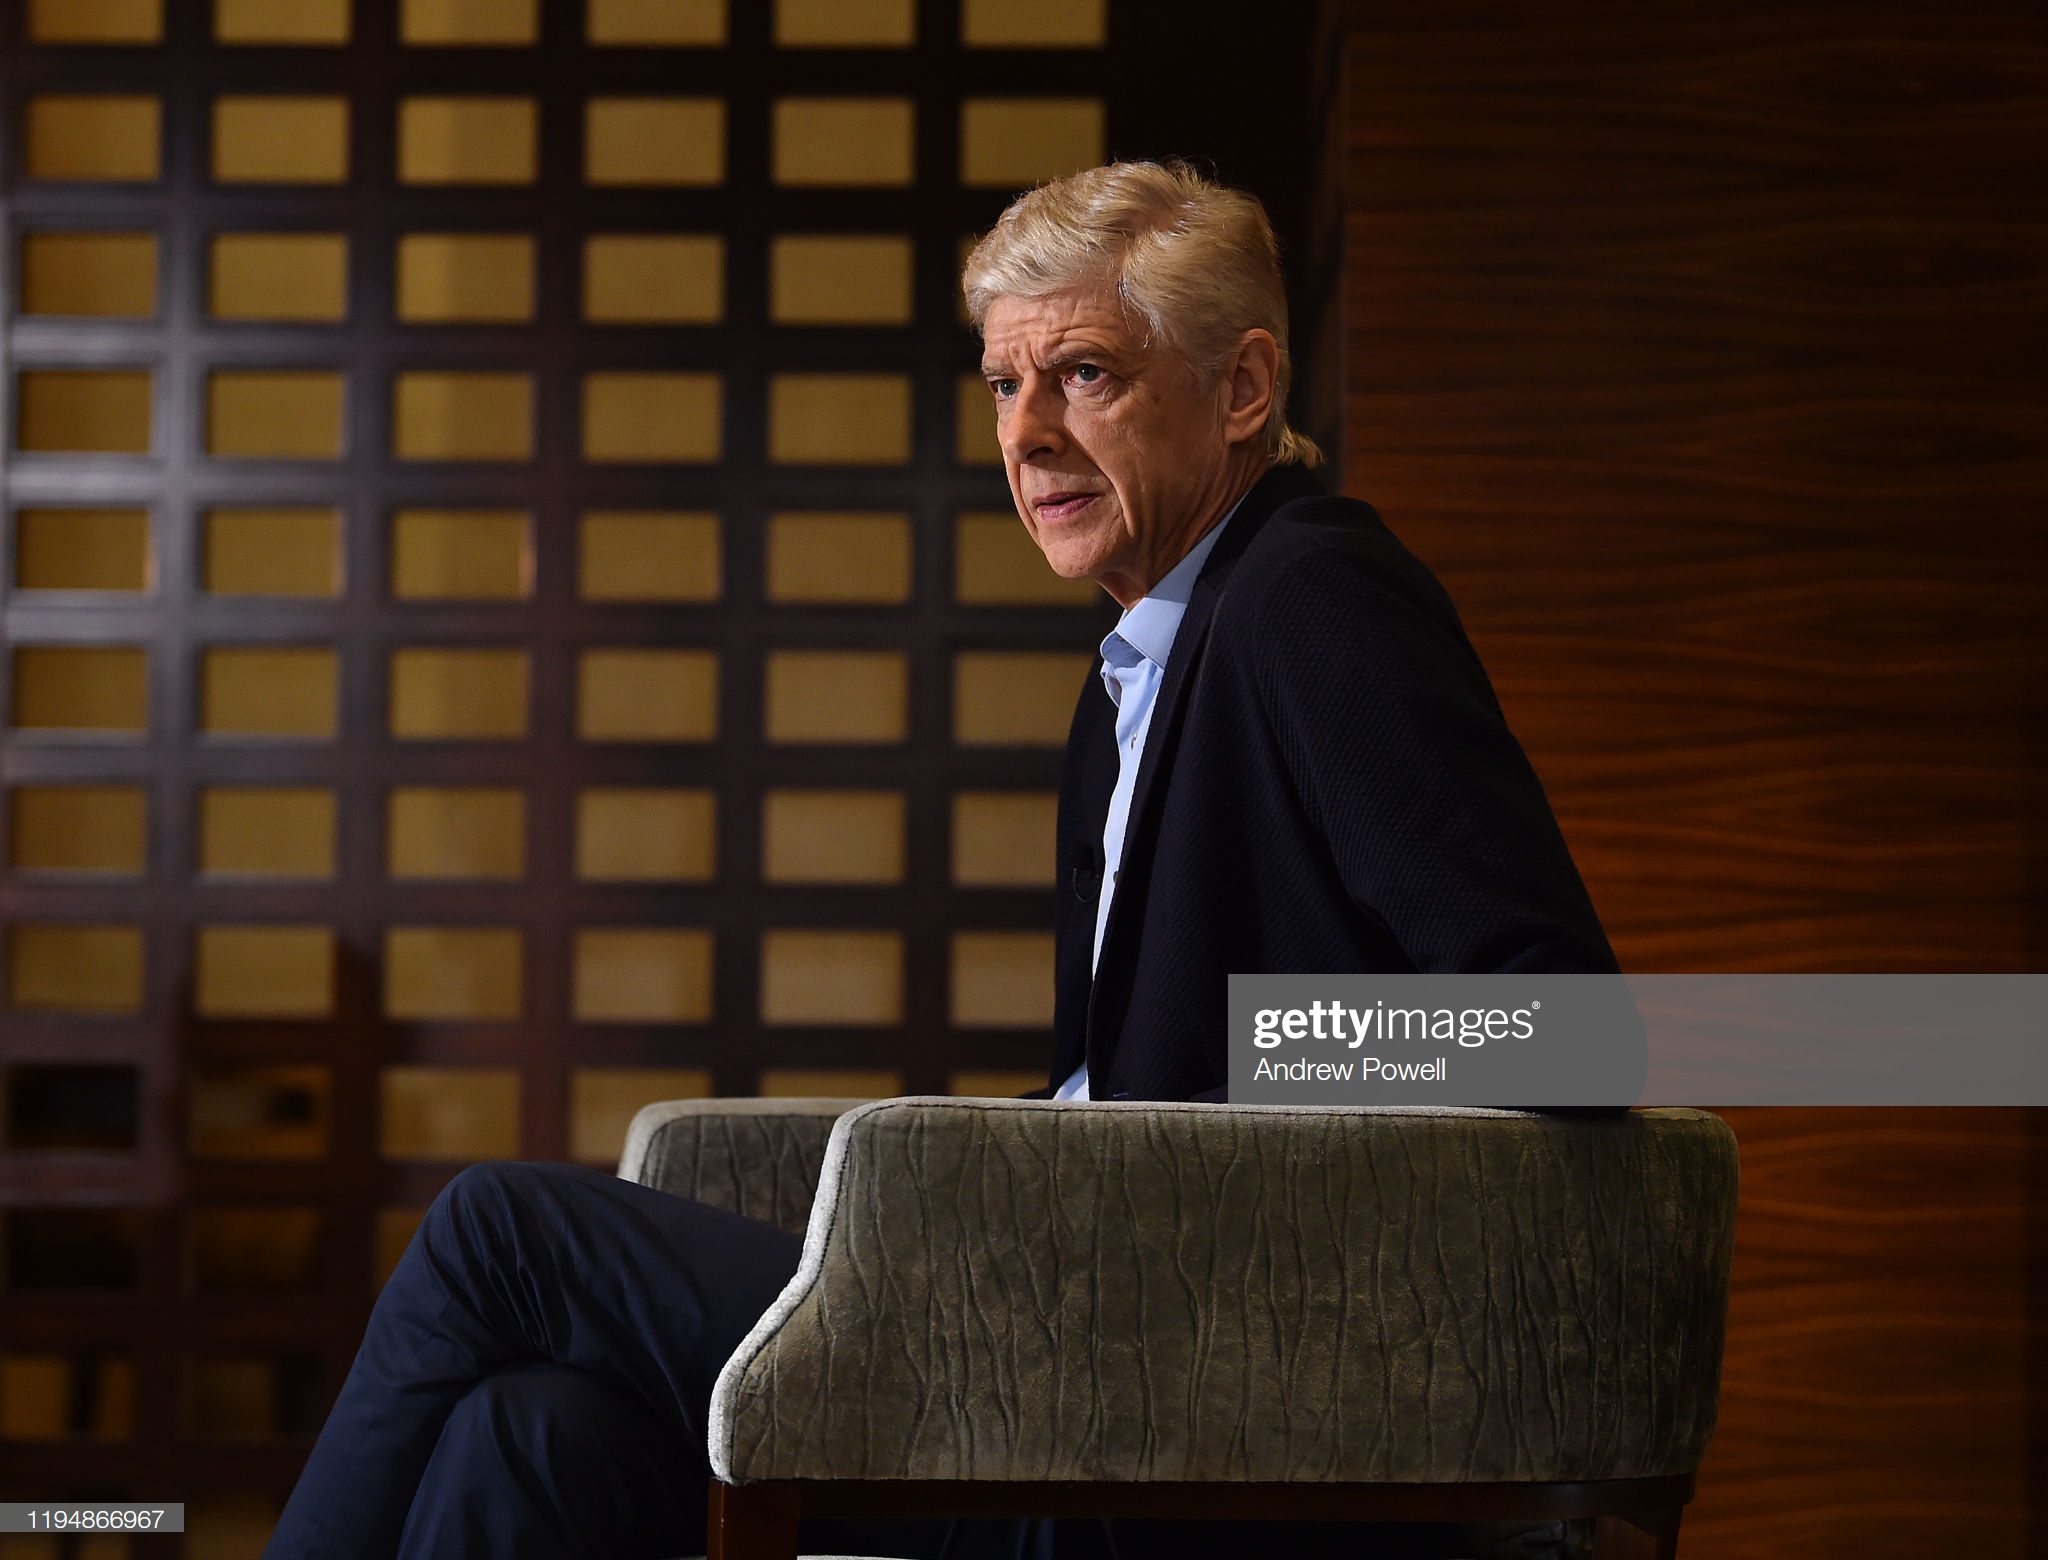 gettyimages-1194866967-2048x2048.jpg